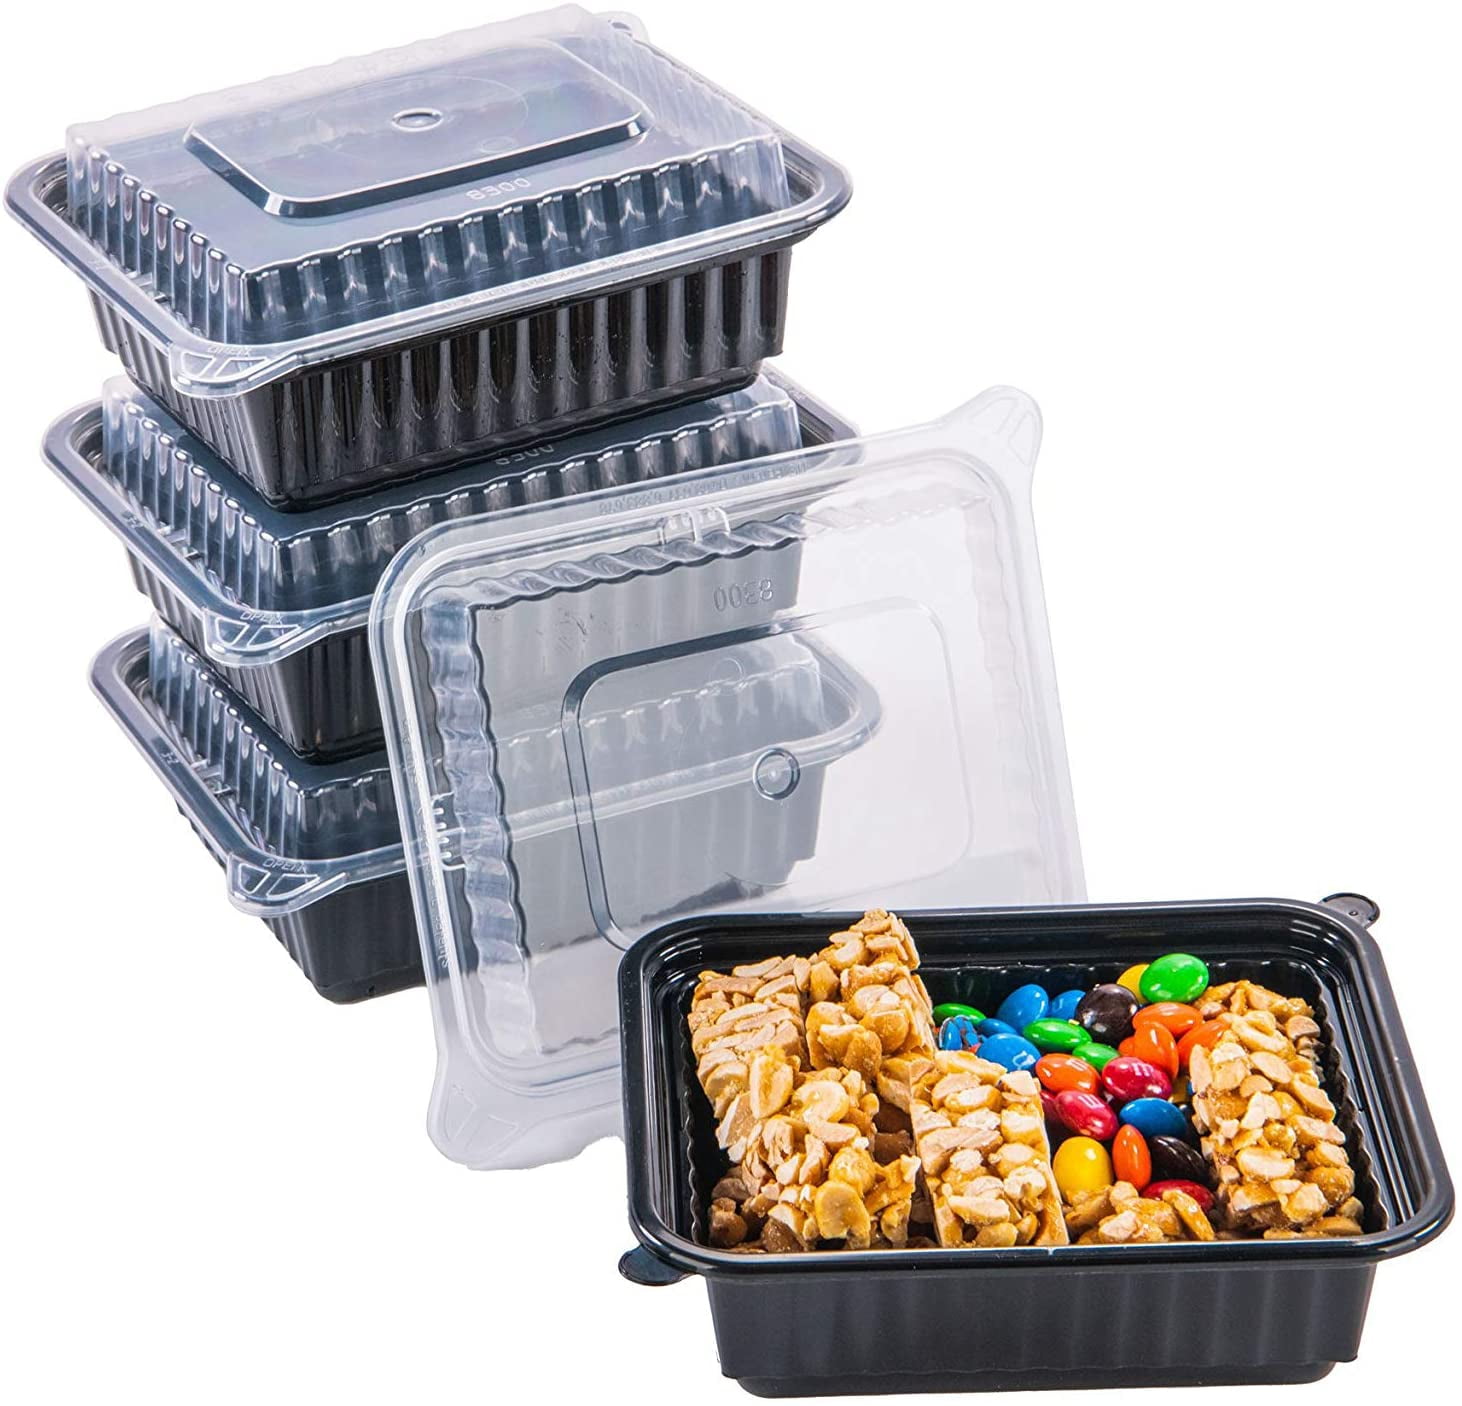 CtC 26oz Meal Prep Container Bento Box Adult Lunch Box with Lid | Microwave Safe BPA Free Heavy Duty Food Storage Containers Leakproof Plastic Snack